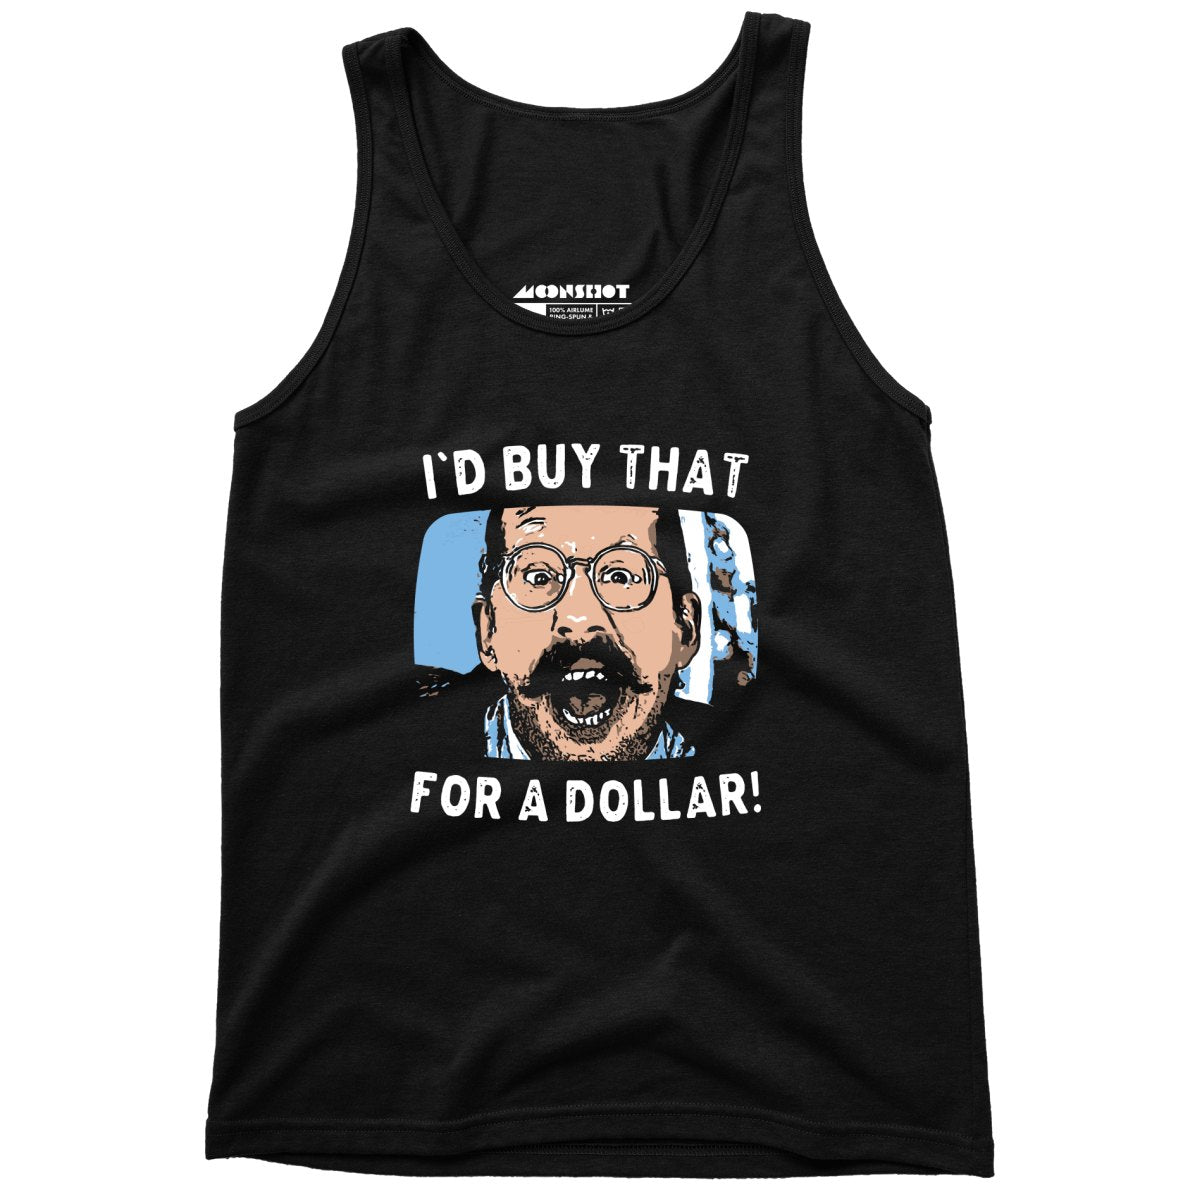 I'd Buy That For a Dollar - Unisex Tank Top